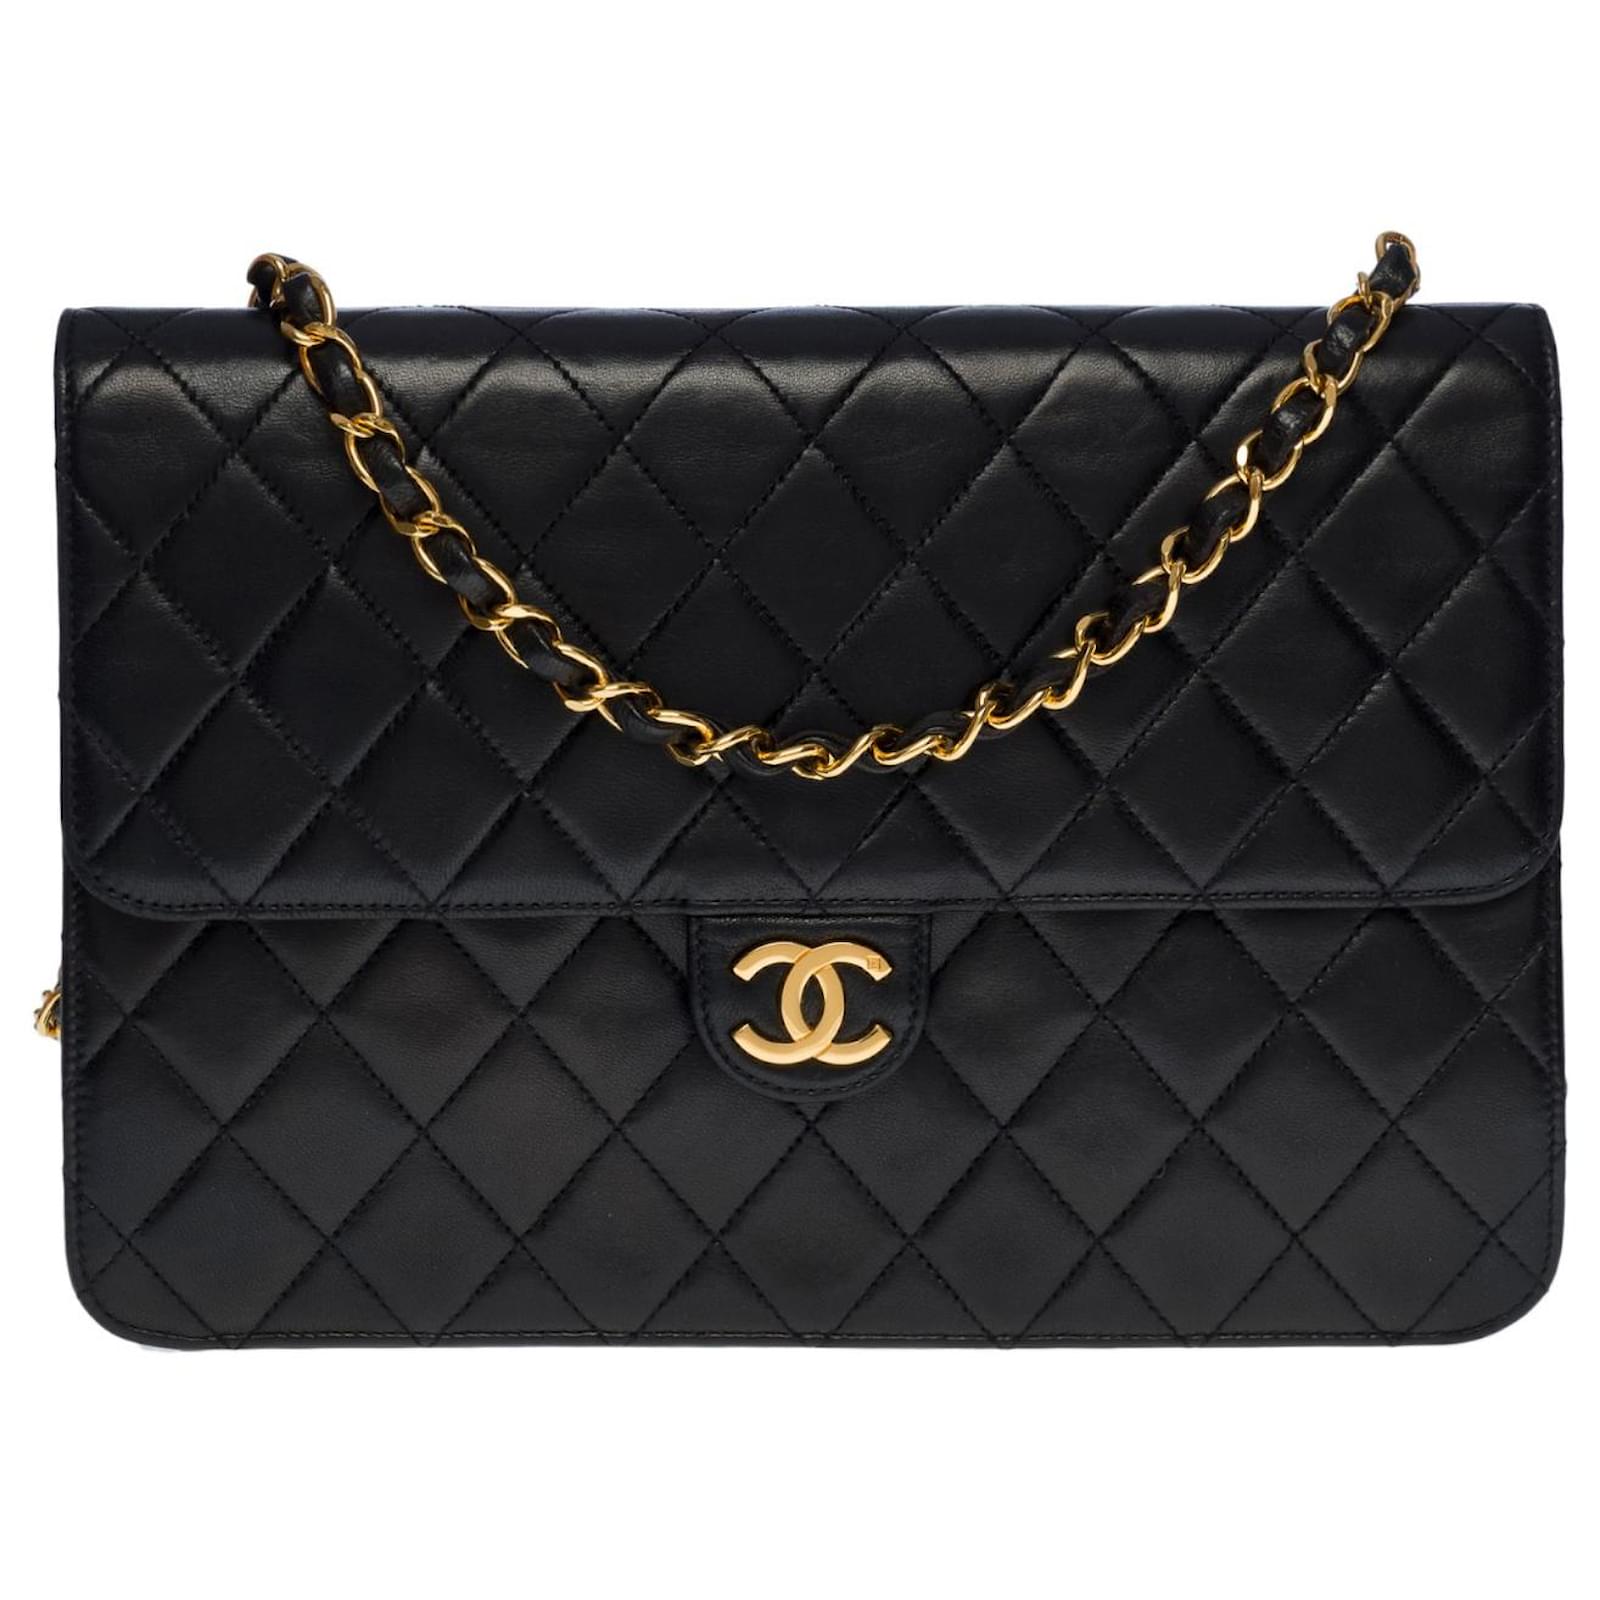 Timeless Very chic Chanel Pochette Classique flap bag in black